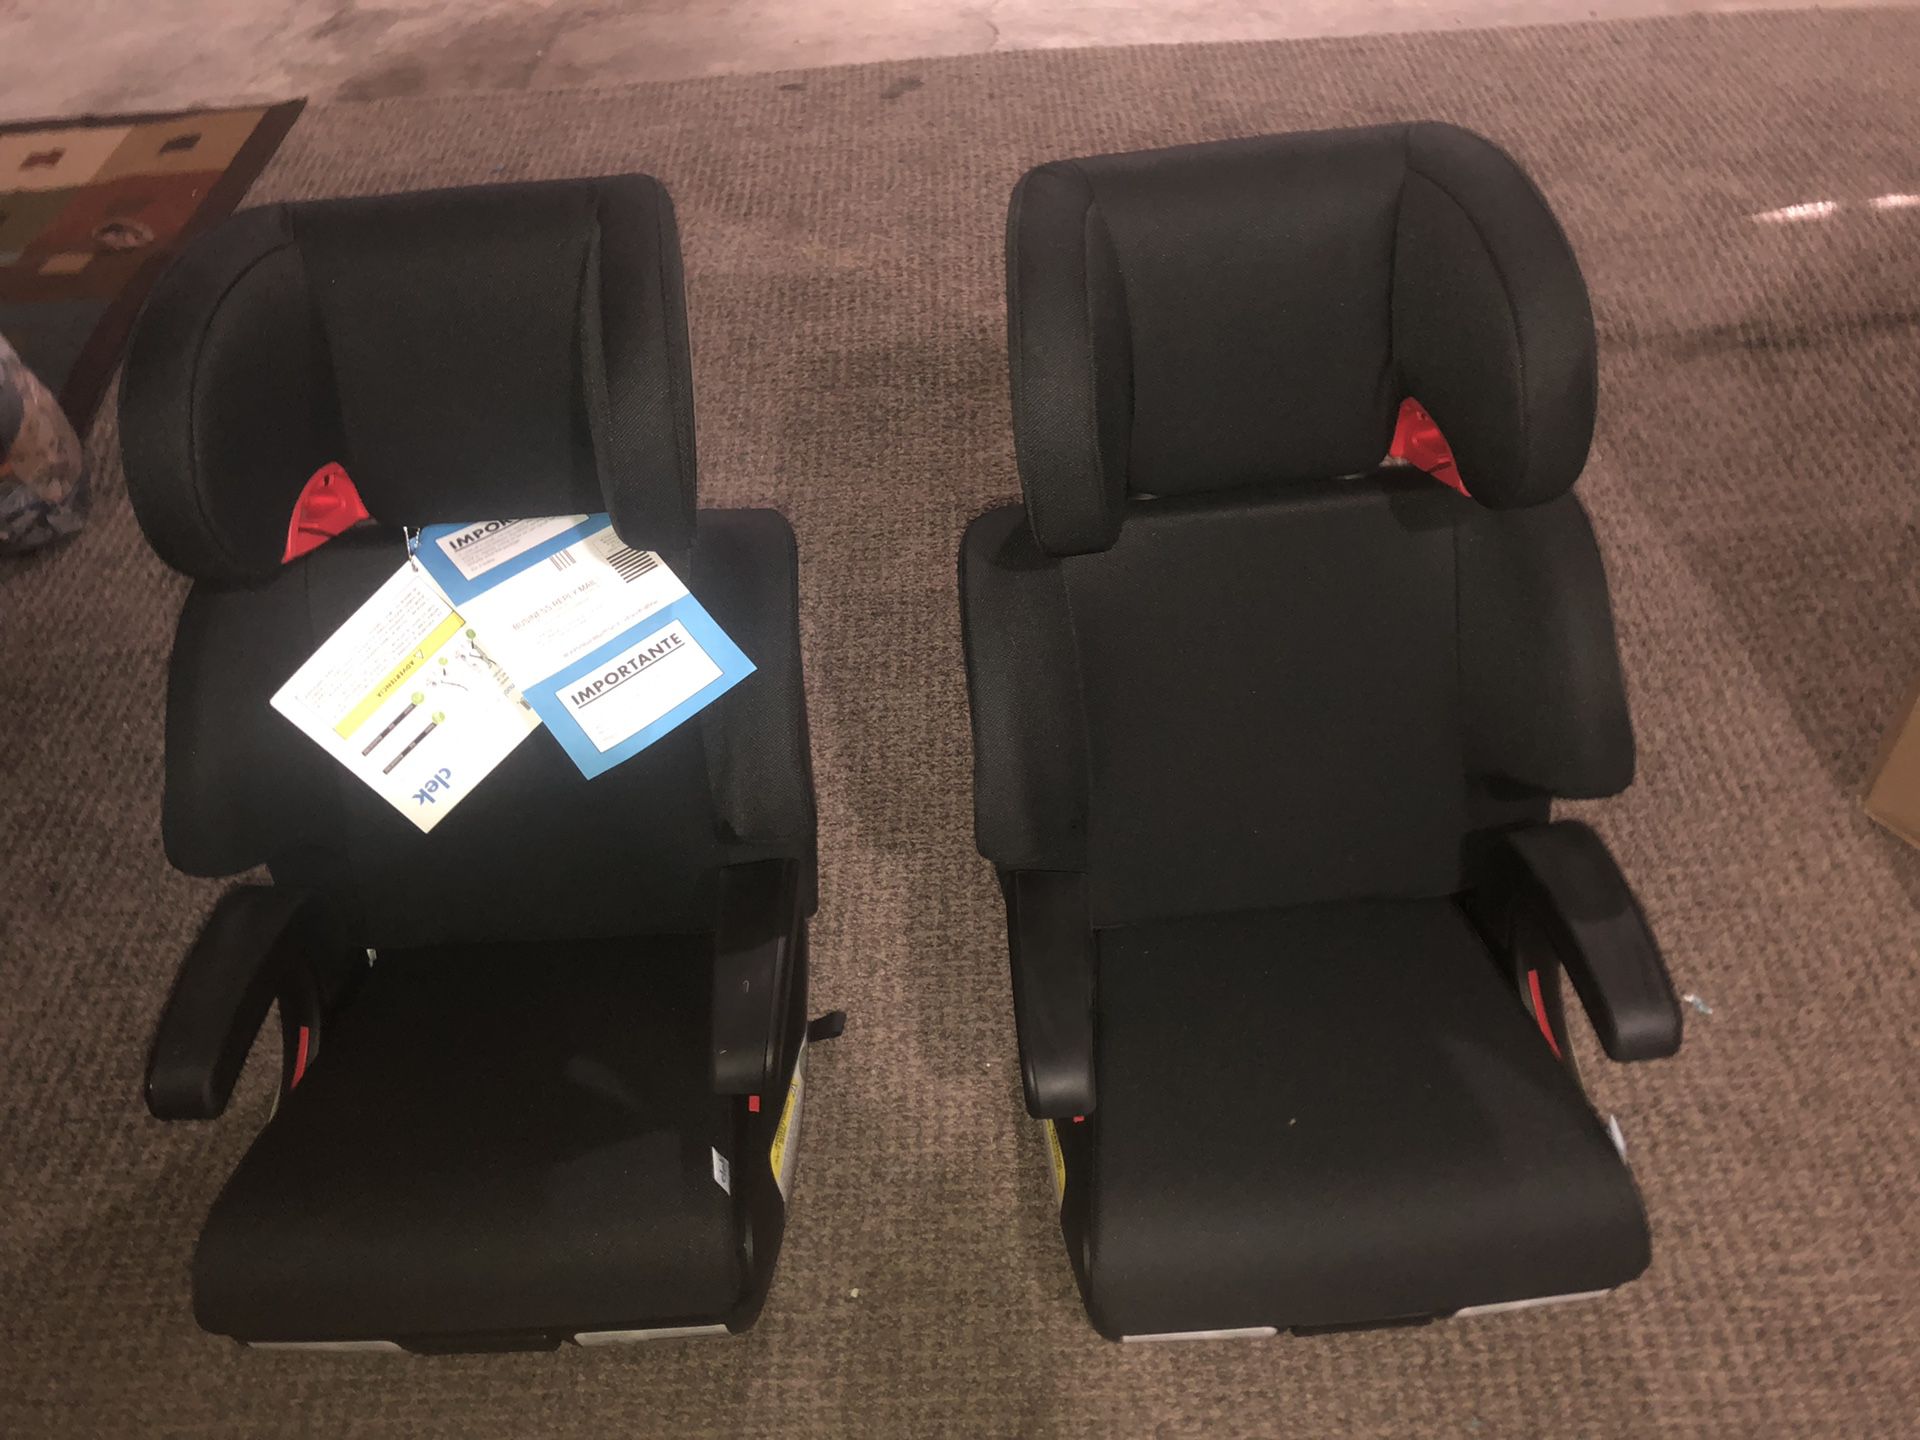 2 car seats for $140 or $70 each